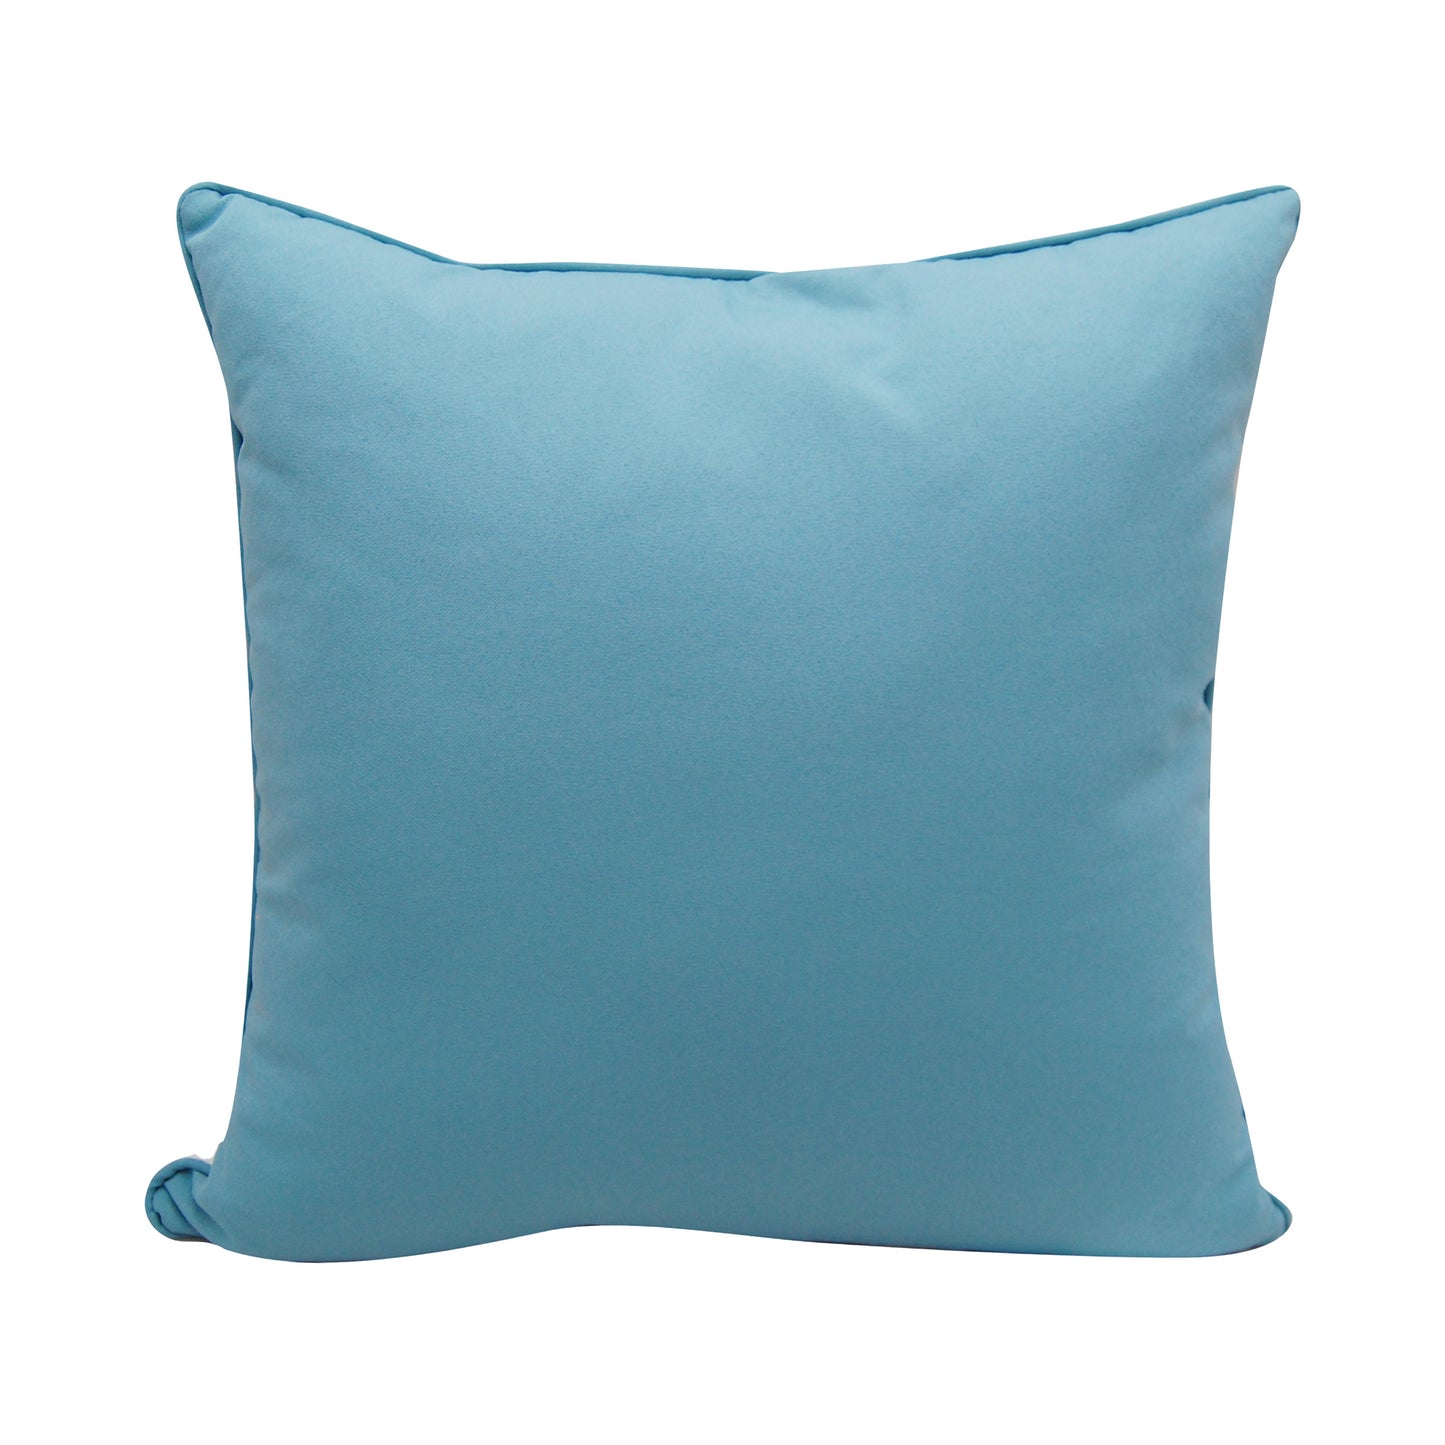 Solid blue fabric; back of Blue Heron Left and Saltmarsh outdoor pillow.